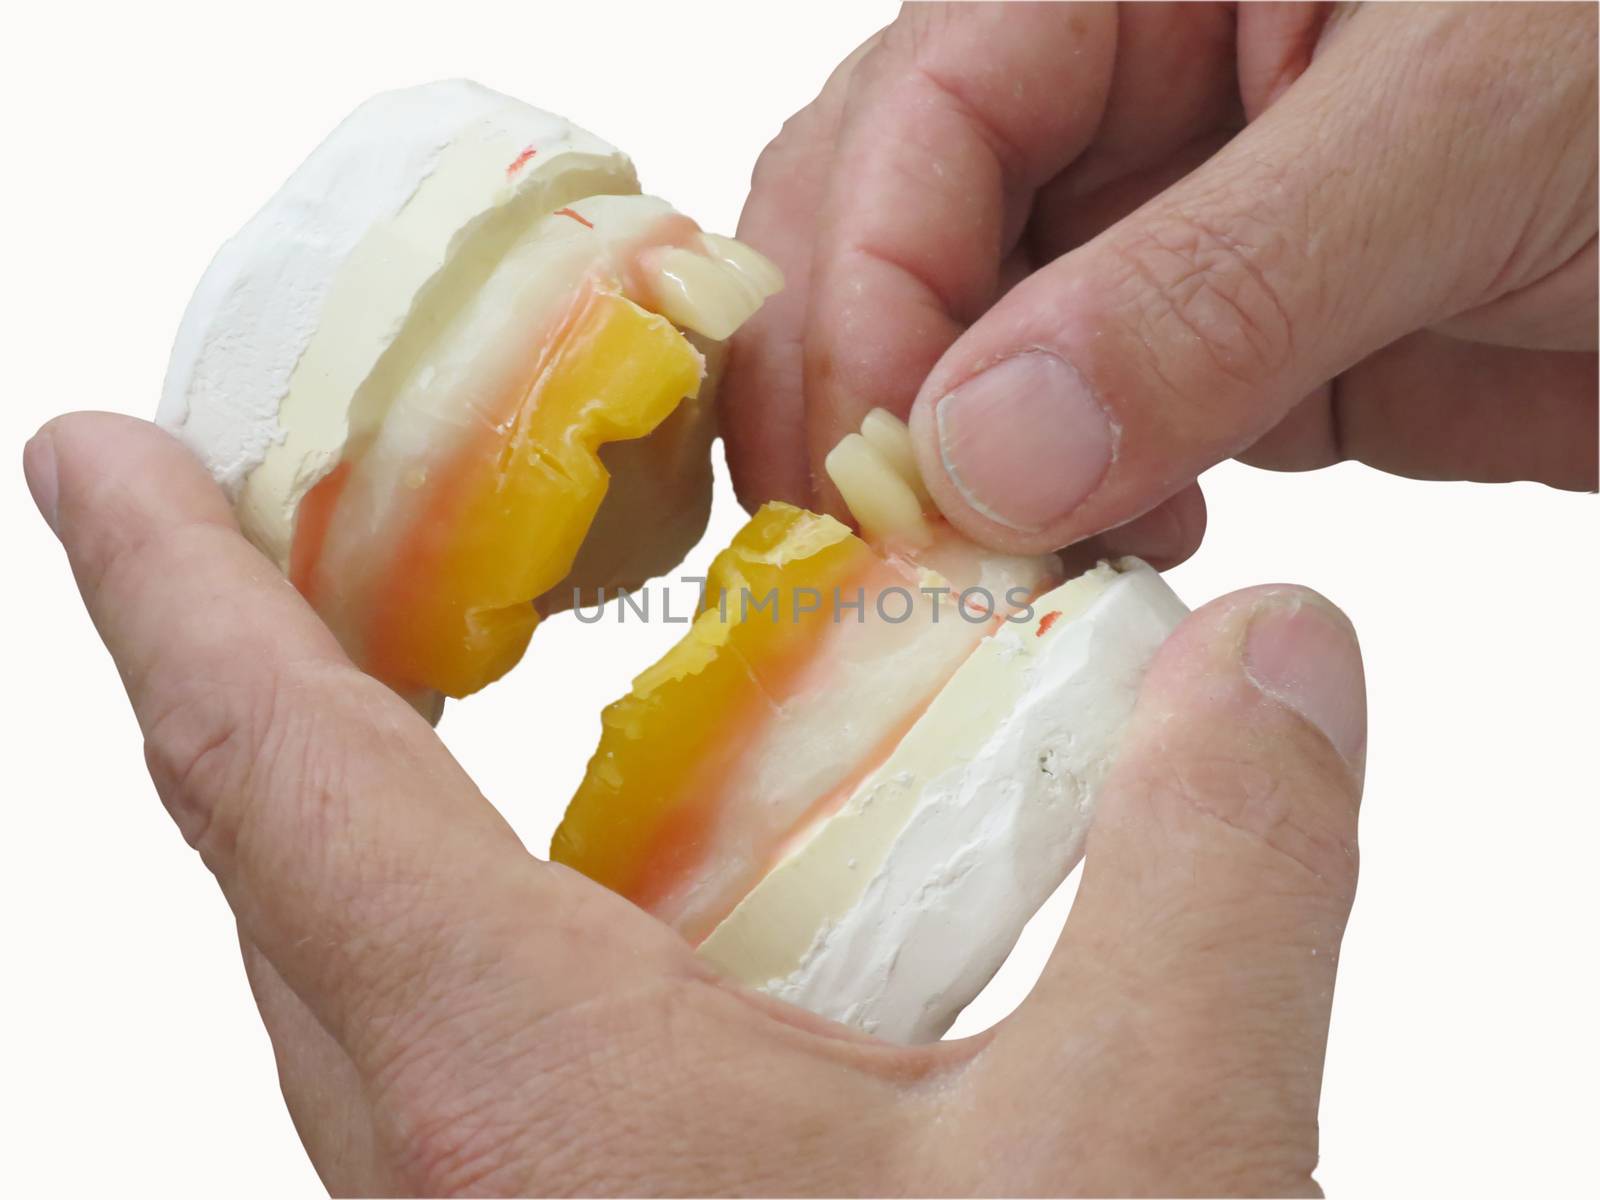 specialized hands that shape a plaster denture by alto190